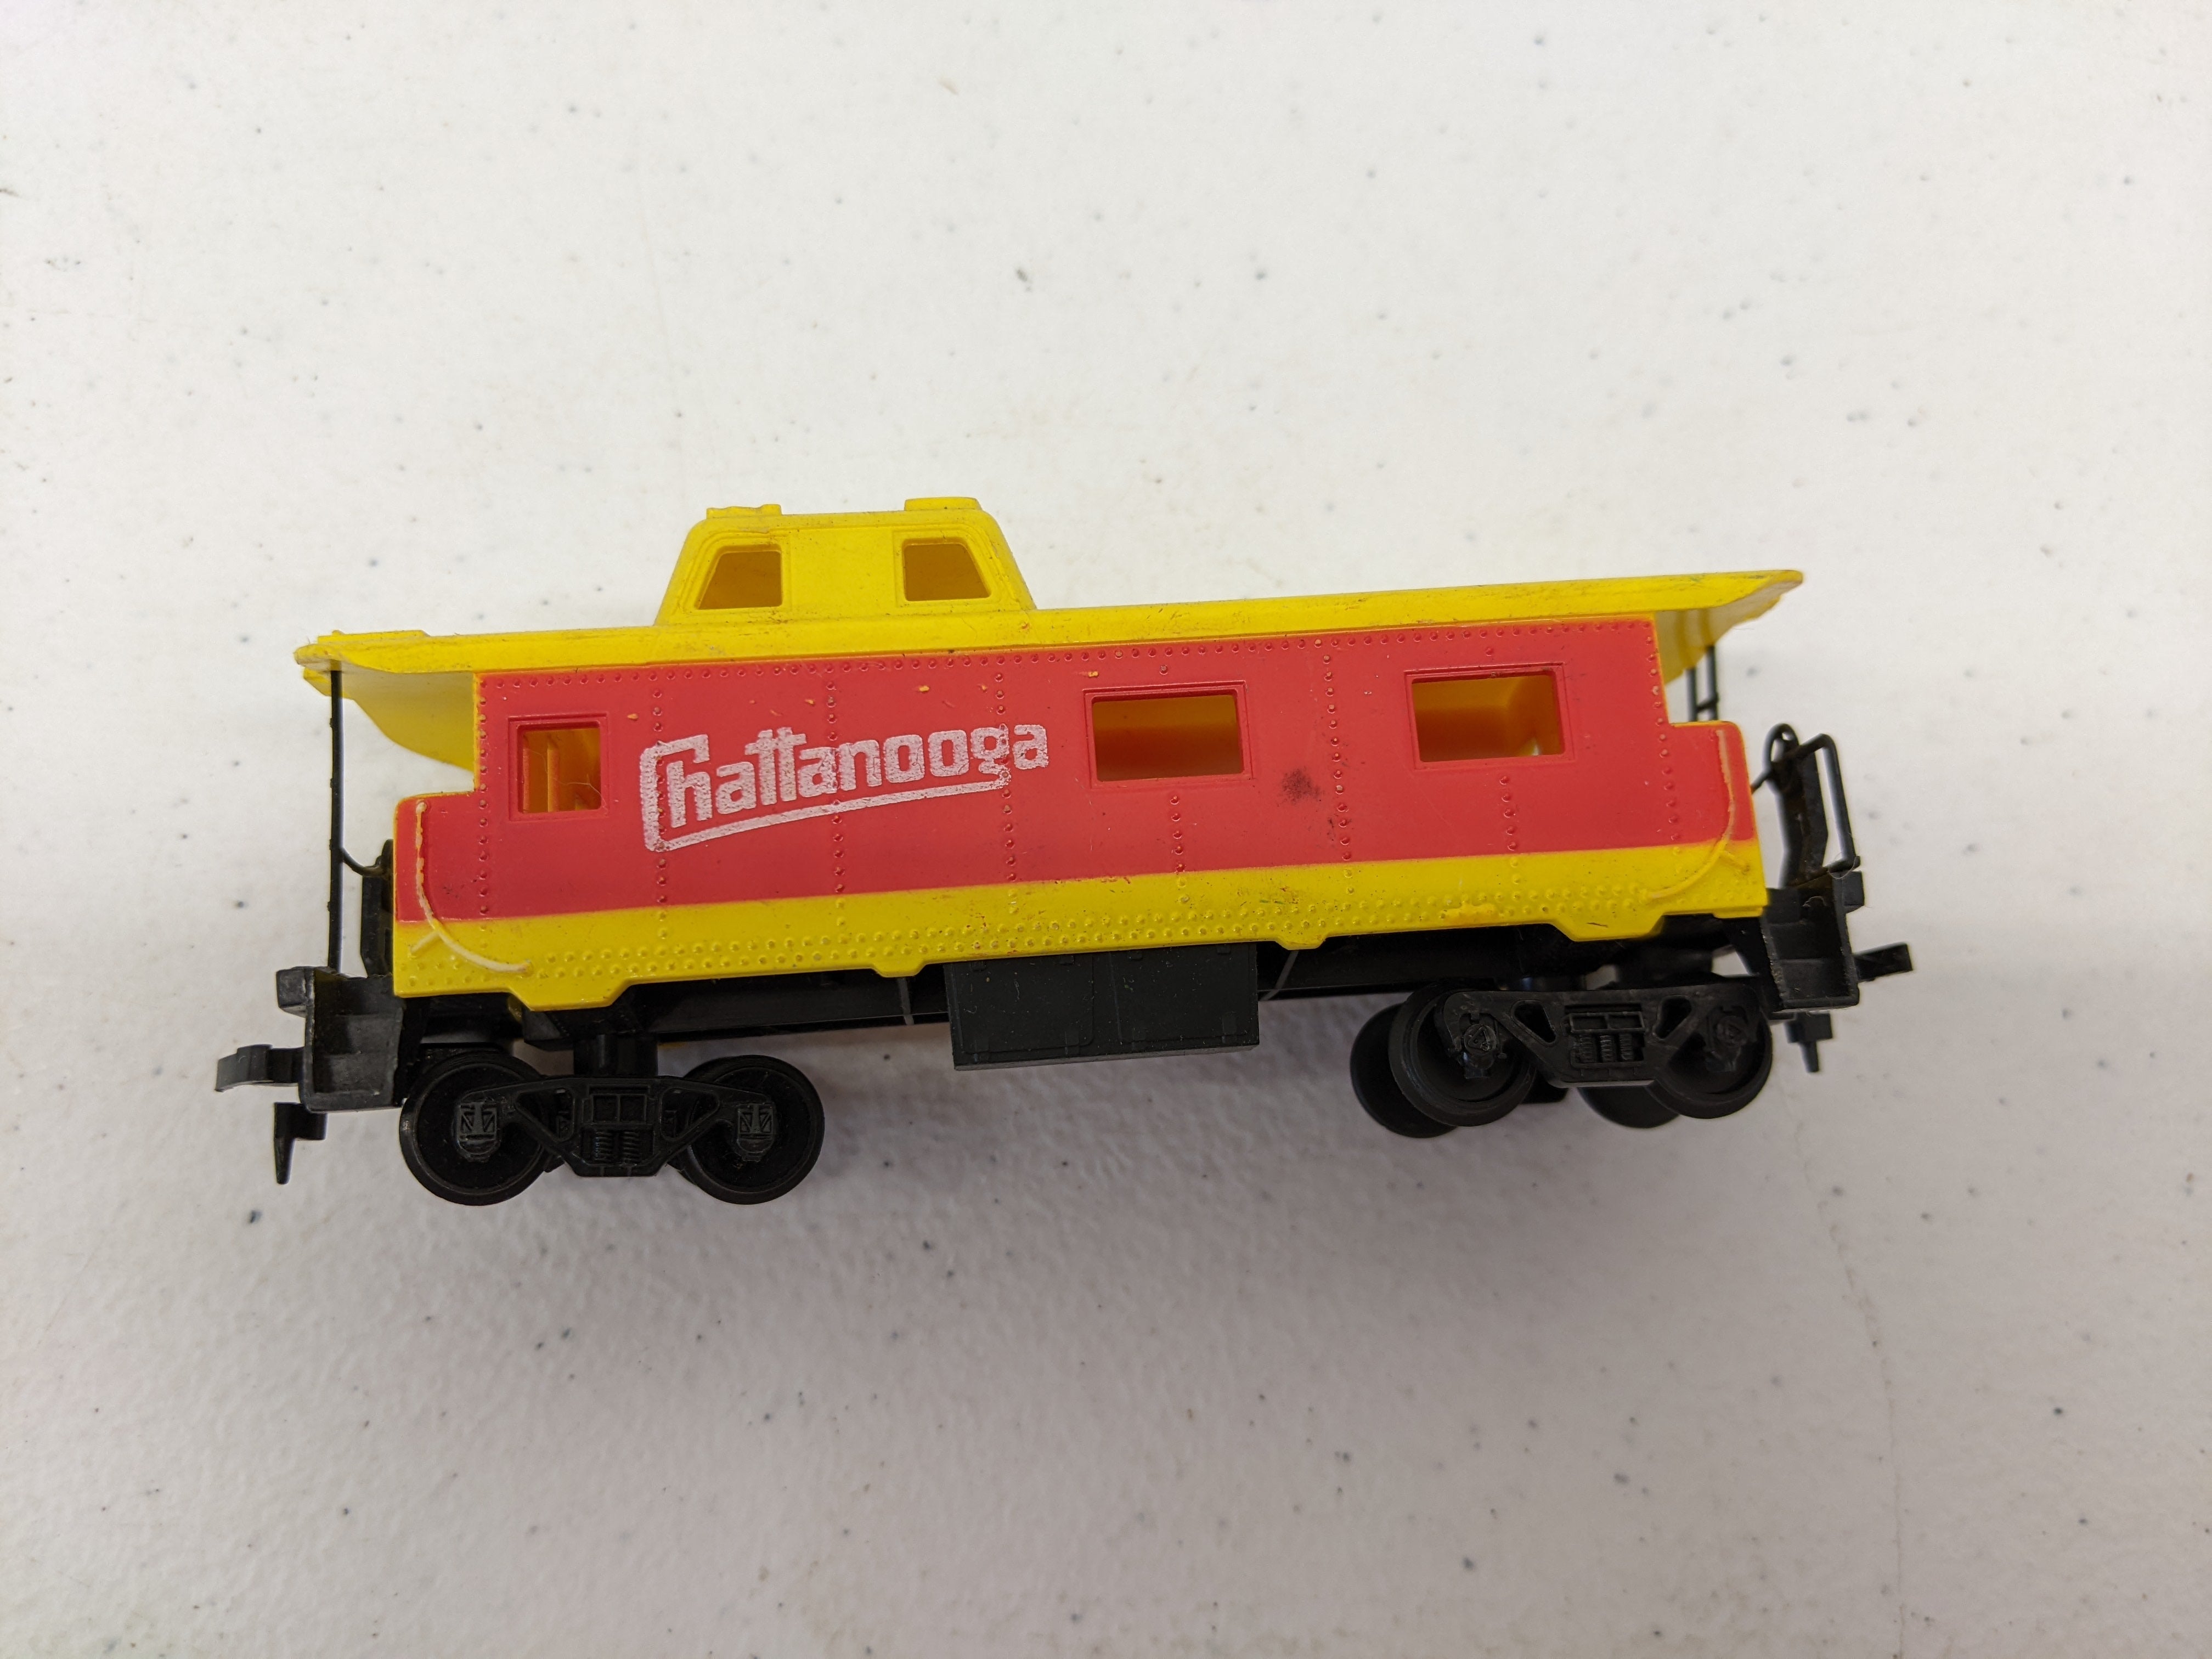 USED Tyco HO Scale, Caboose, Chattanooga